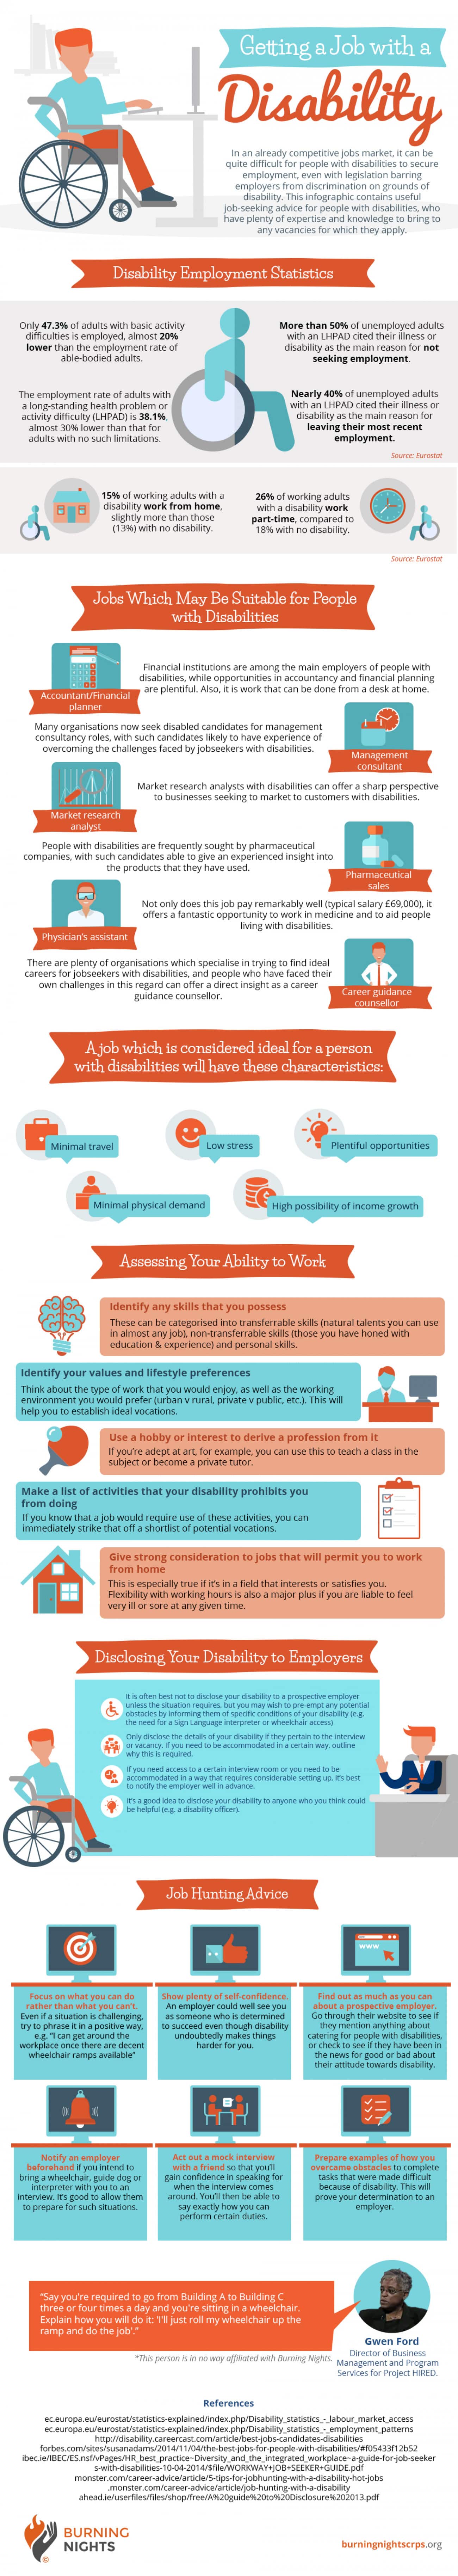 How to Get a Job With a Disability [INFOGRAPHIC]